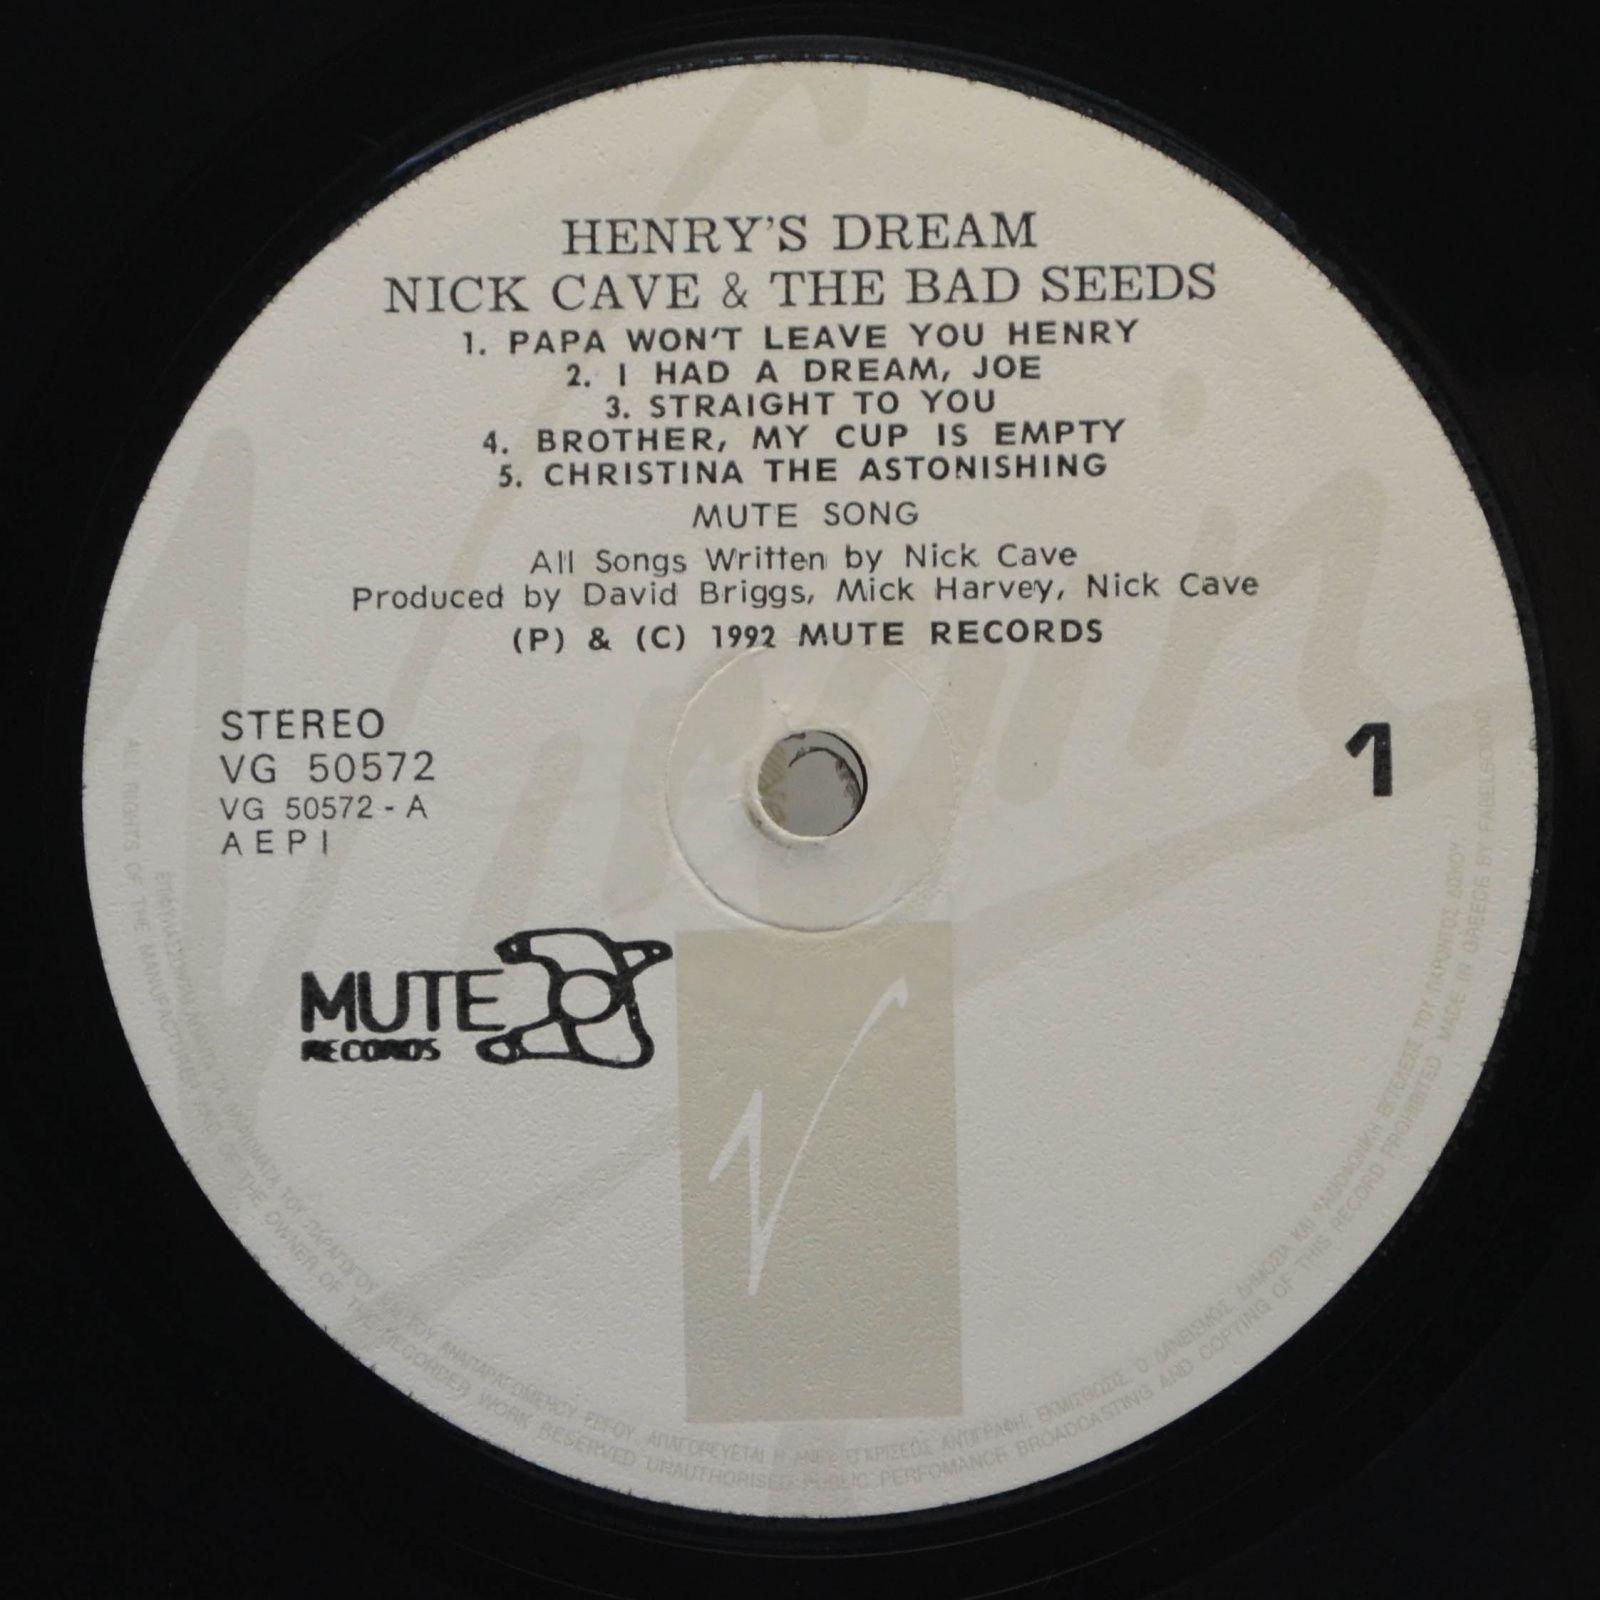 Nick Cave & The Bad Seed — Henry's Dream, 1992